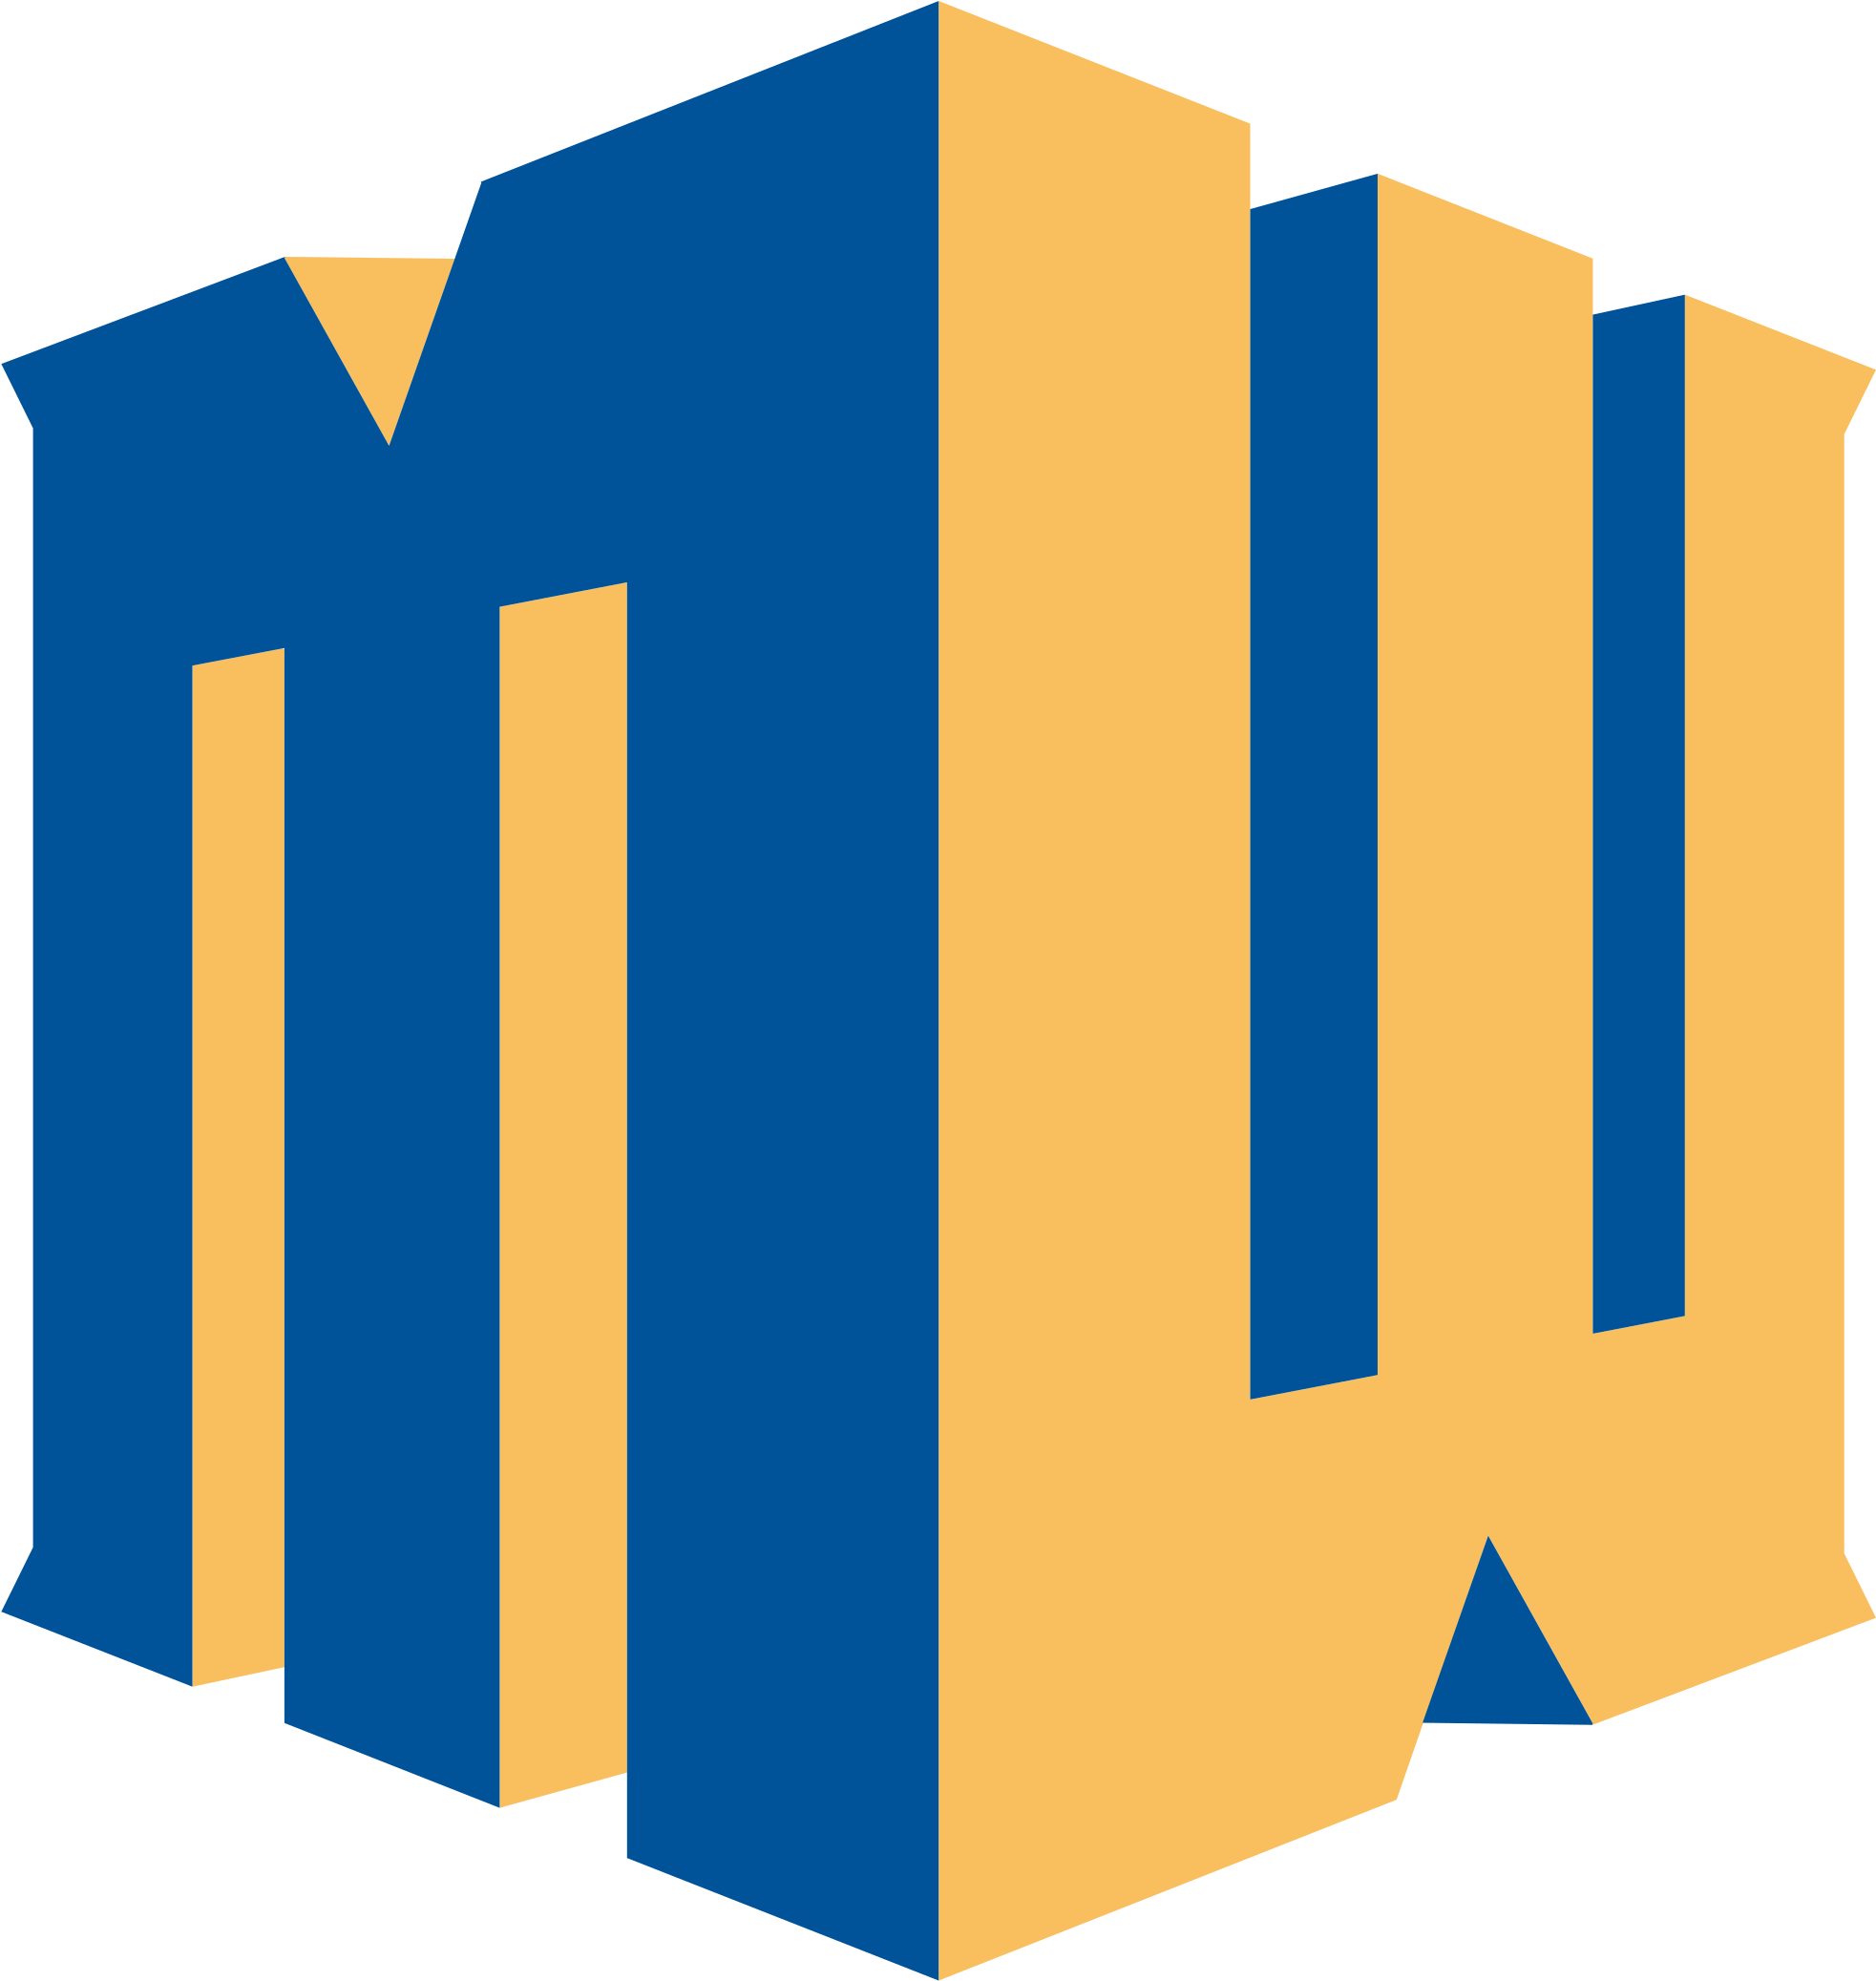 San Jose State Is A Member Of The Mountain West Conference - Mountain West Conference Logo (2000x2109)